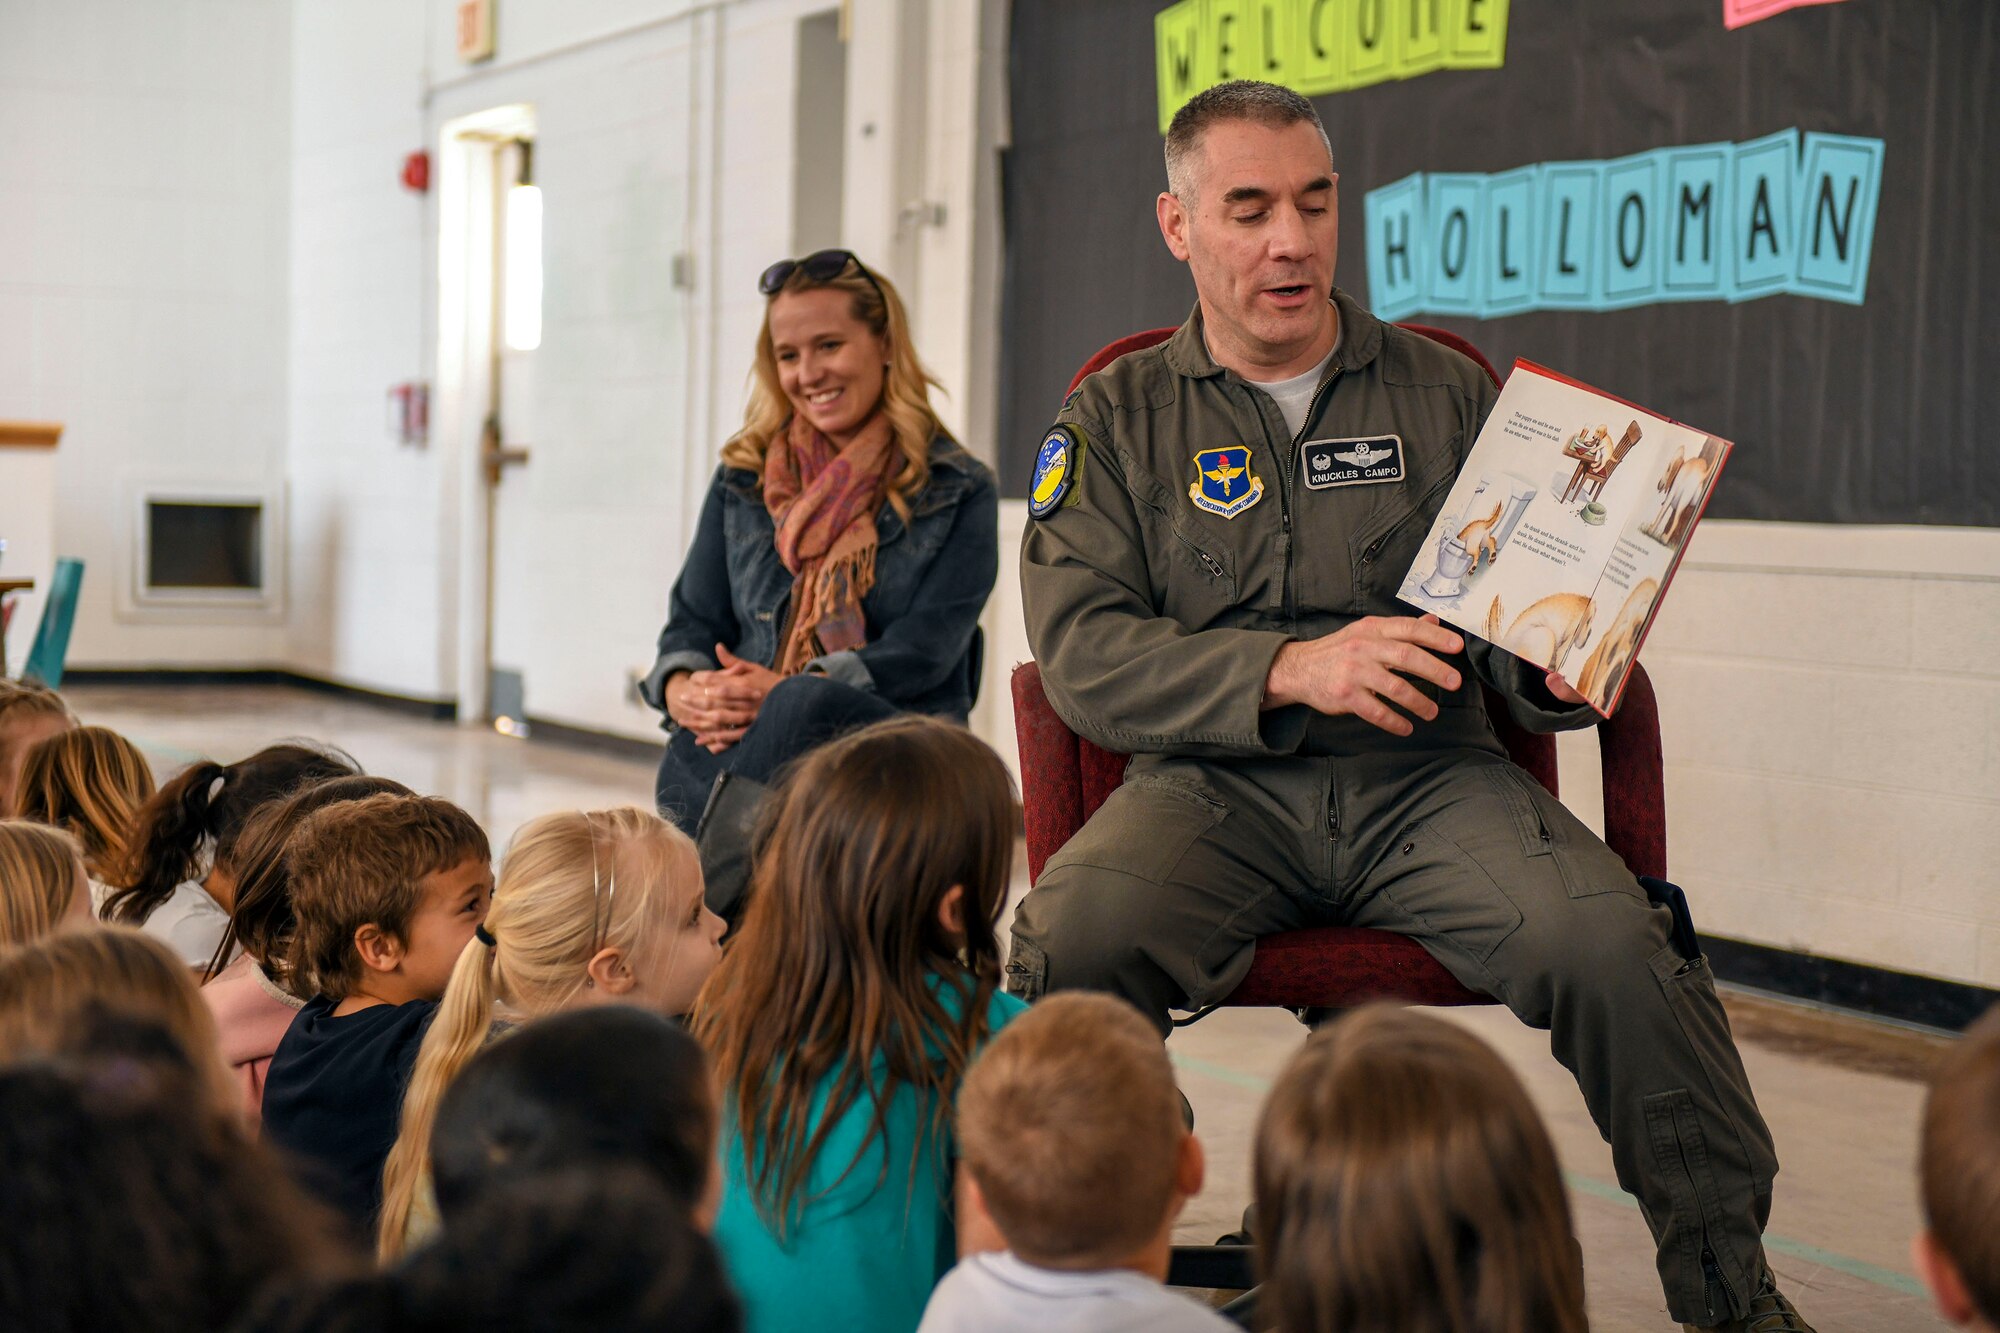 Col. Joseph Campo, 49th Wing commander, reads to children at Holloman Elementary School, Feb. 21, 2019, on Holloman Air Force Base, N.M. Campo read to the children as he was selected as this month’s ‘mystery reader.’ (U.S. Air Force photo by Staff Sgt. Christine Groening)